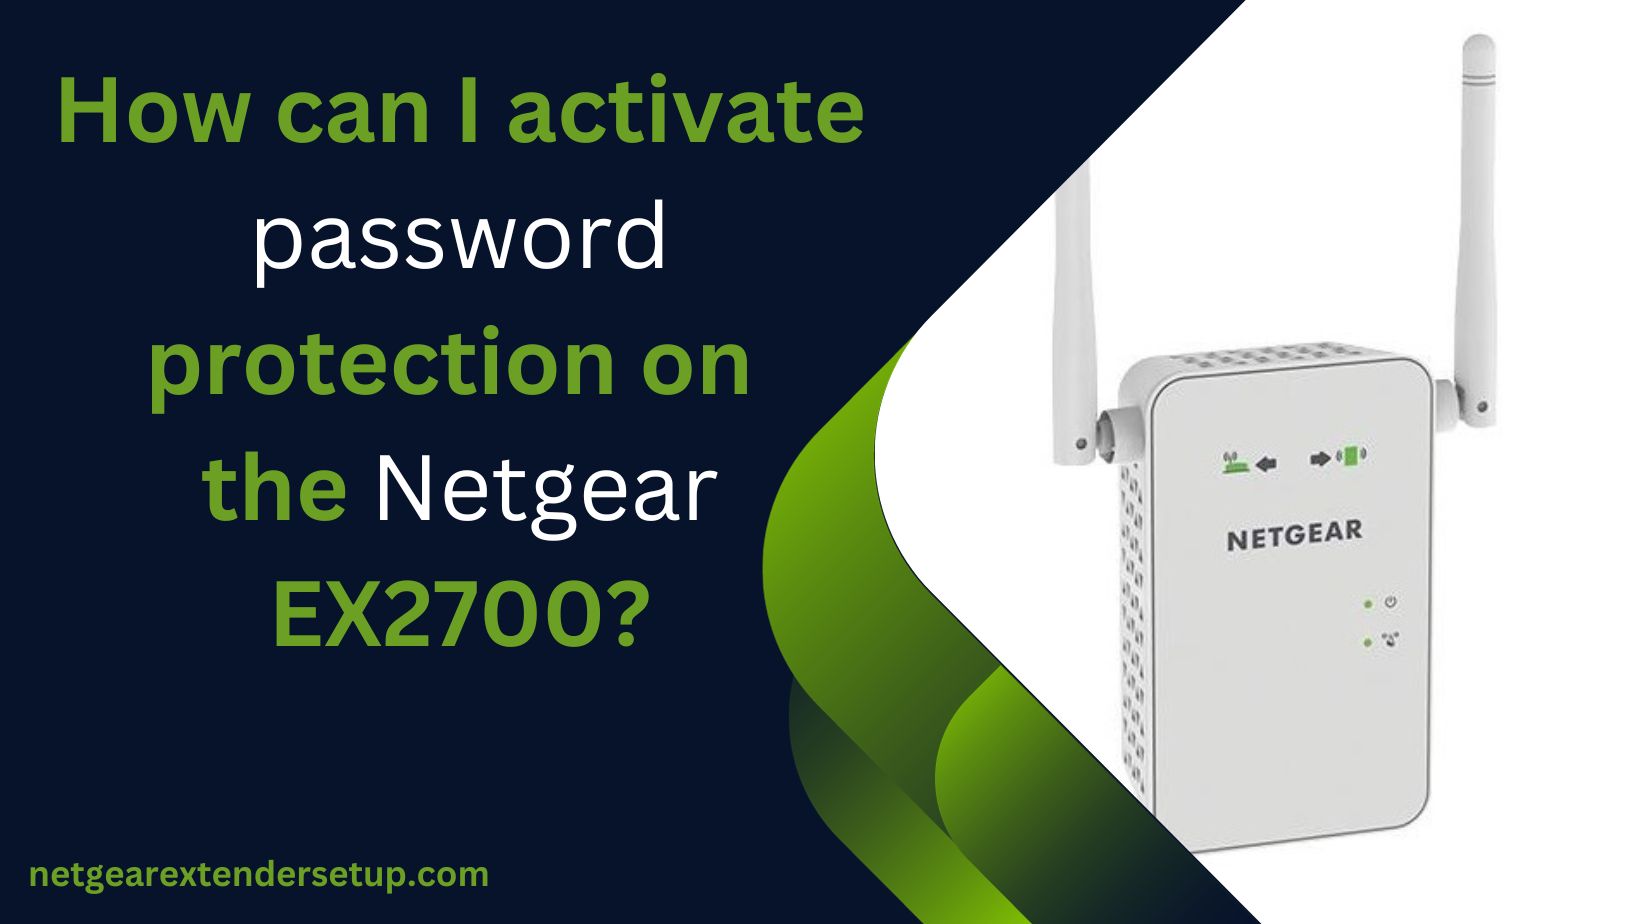 You are currently viewing How can I activate password protection on the Netgear EX2700?